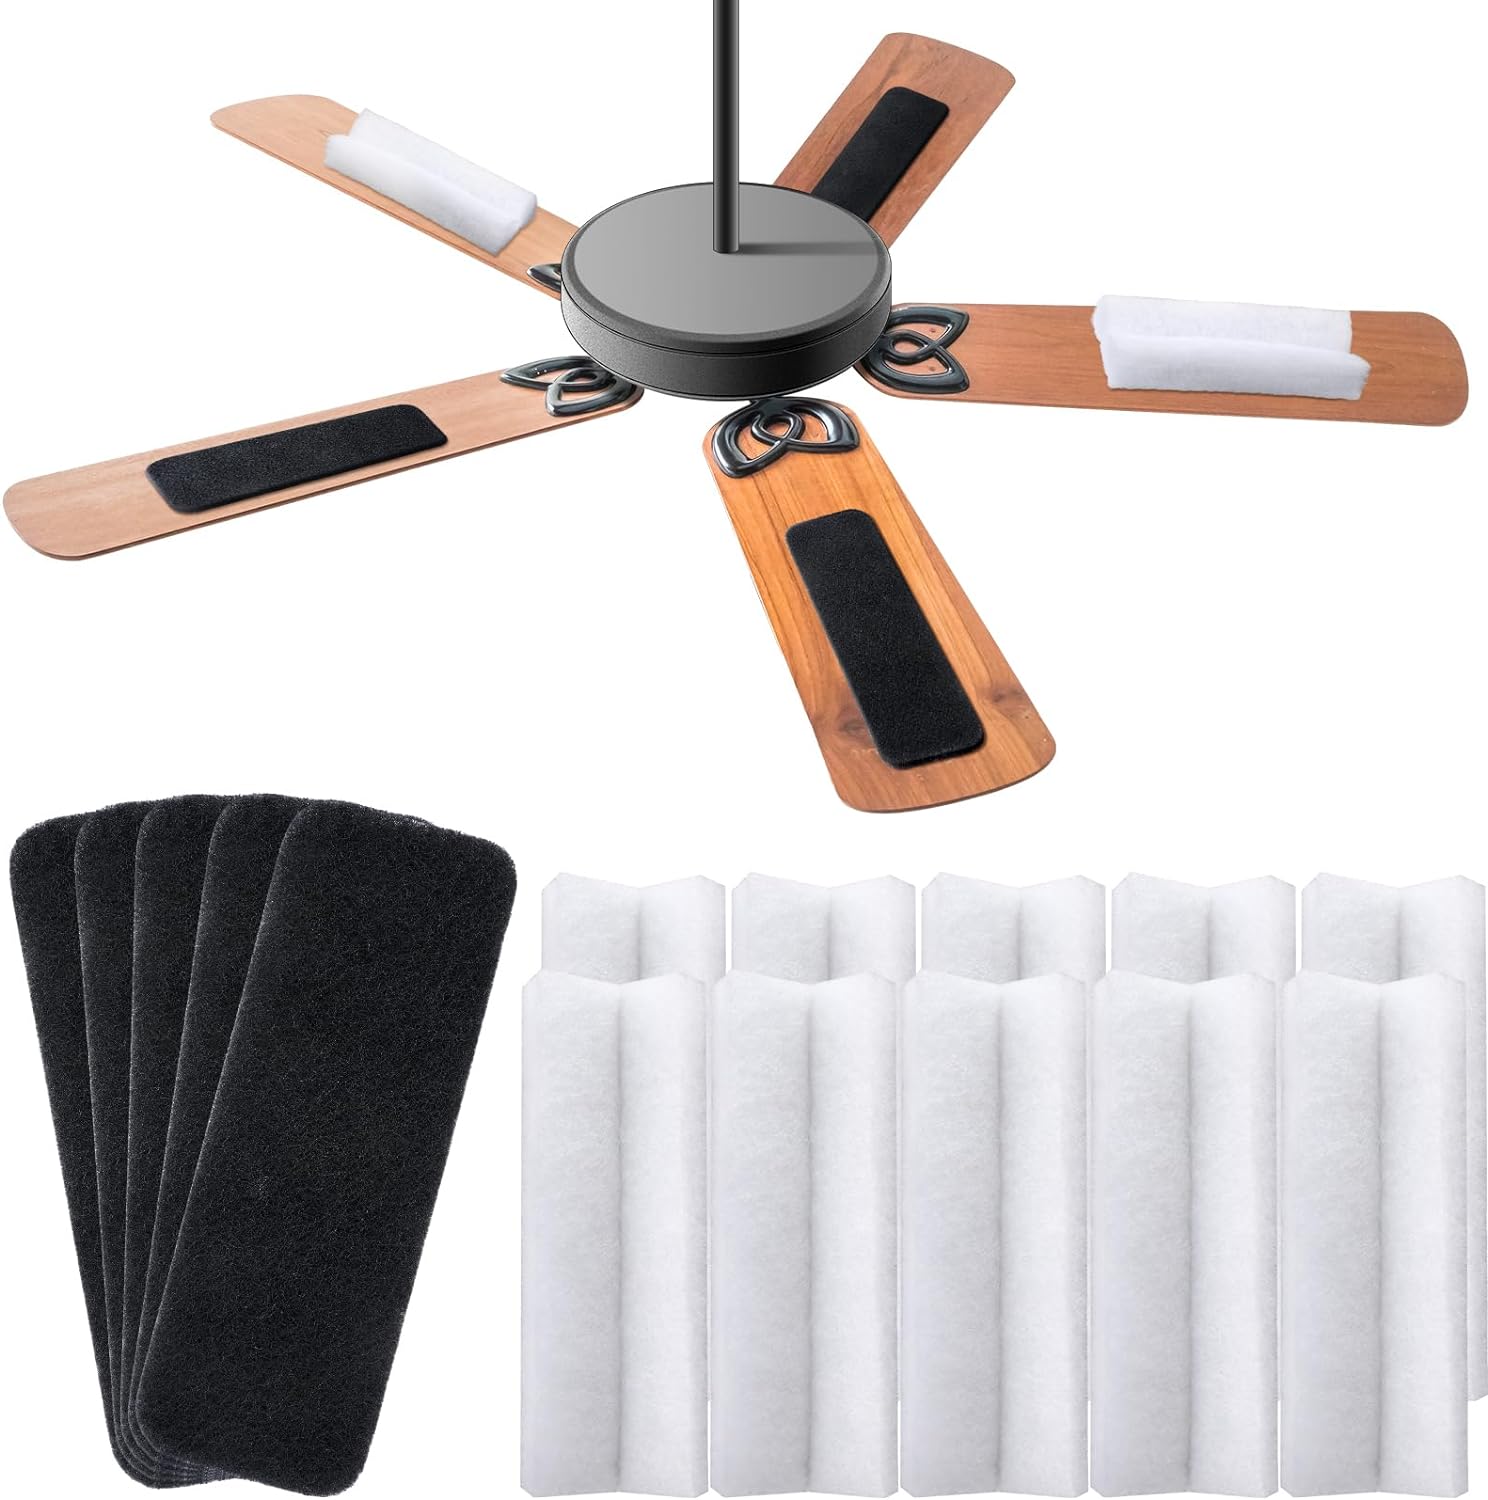 Ceiling Fan Filter Set Ceiling Fan Air Purifier Pads Coconut Carbon Ceiling Fan Air Filter for Indoor Home Filtration Family Rooms Reduce Dirt Dust Smoke(10 Pcs)